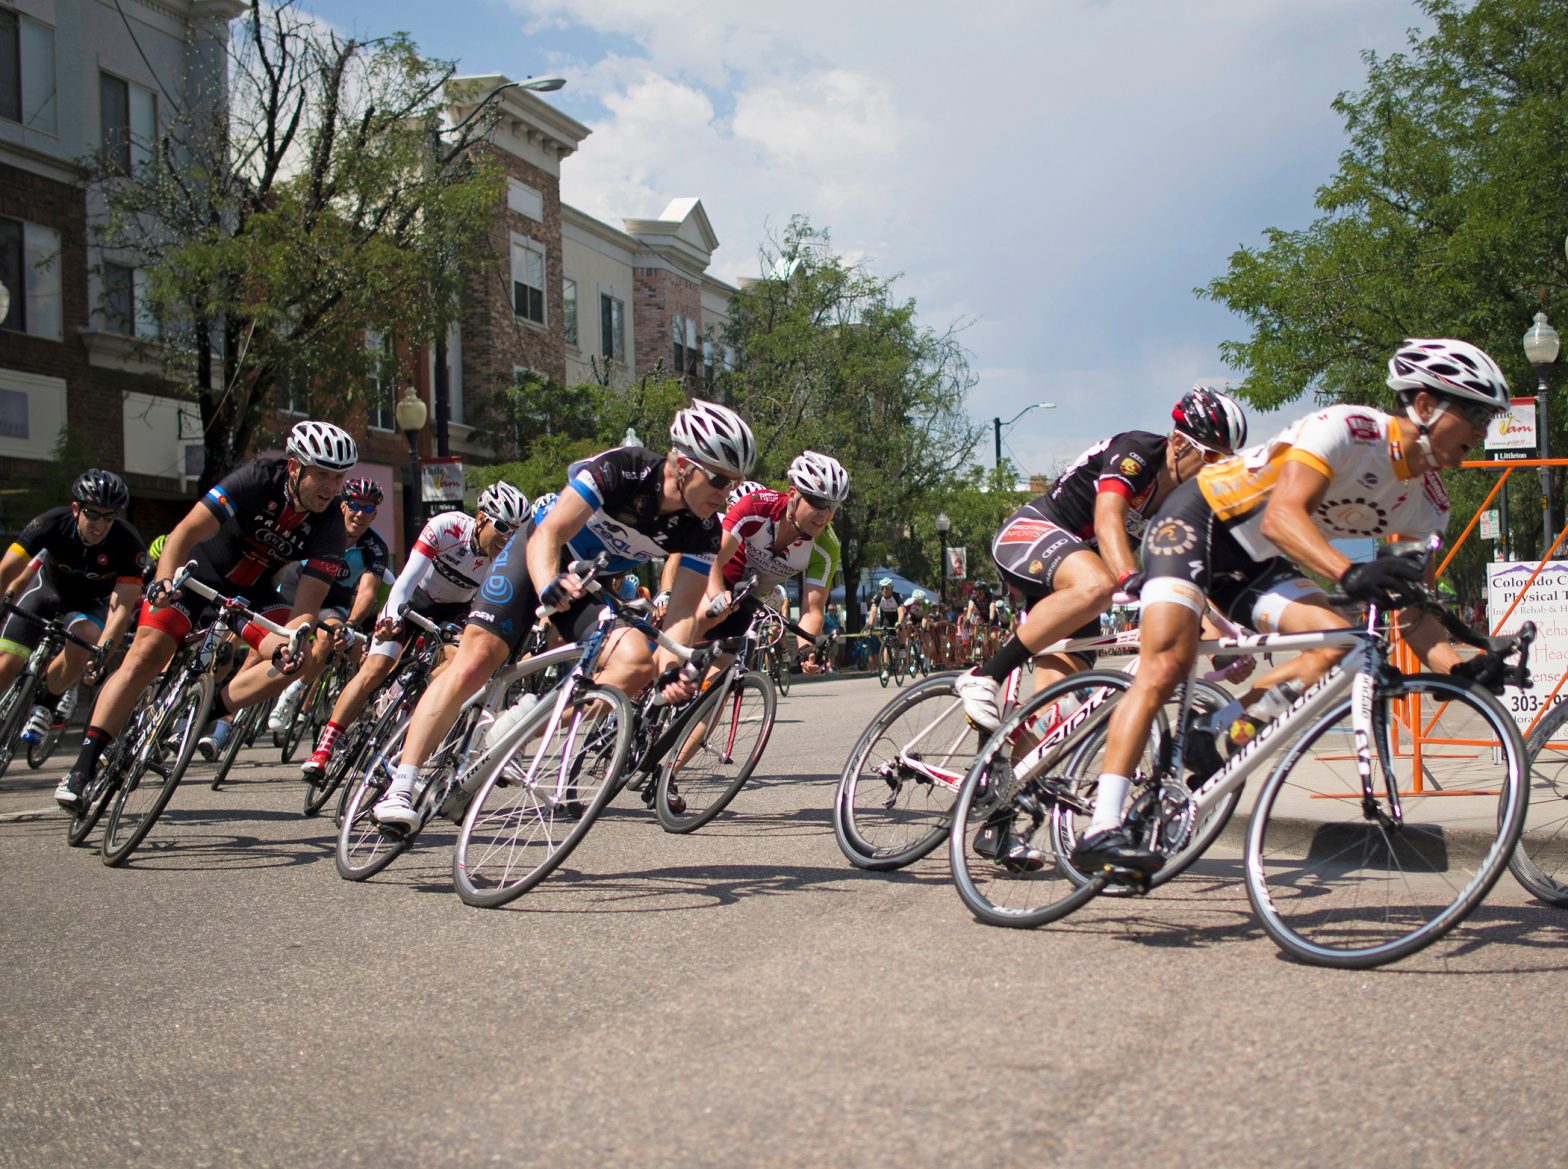 Cyclists race through the streets of downtown Littleton, CO